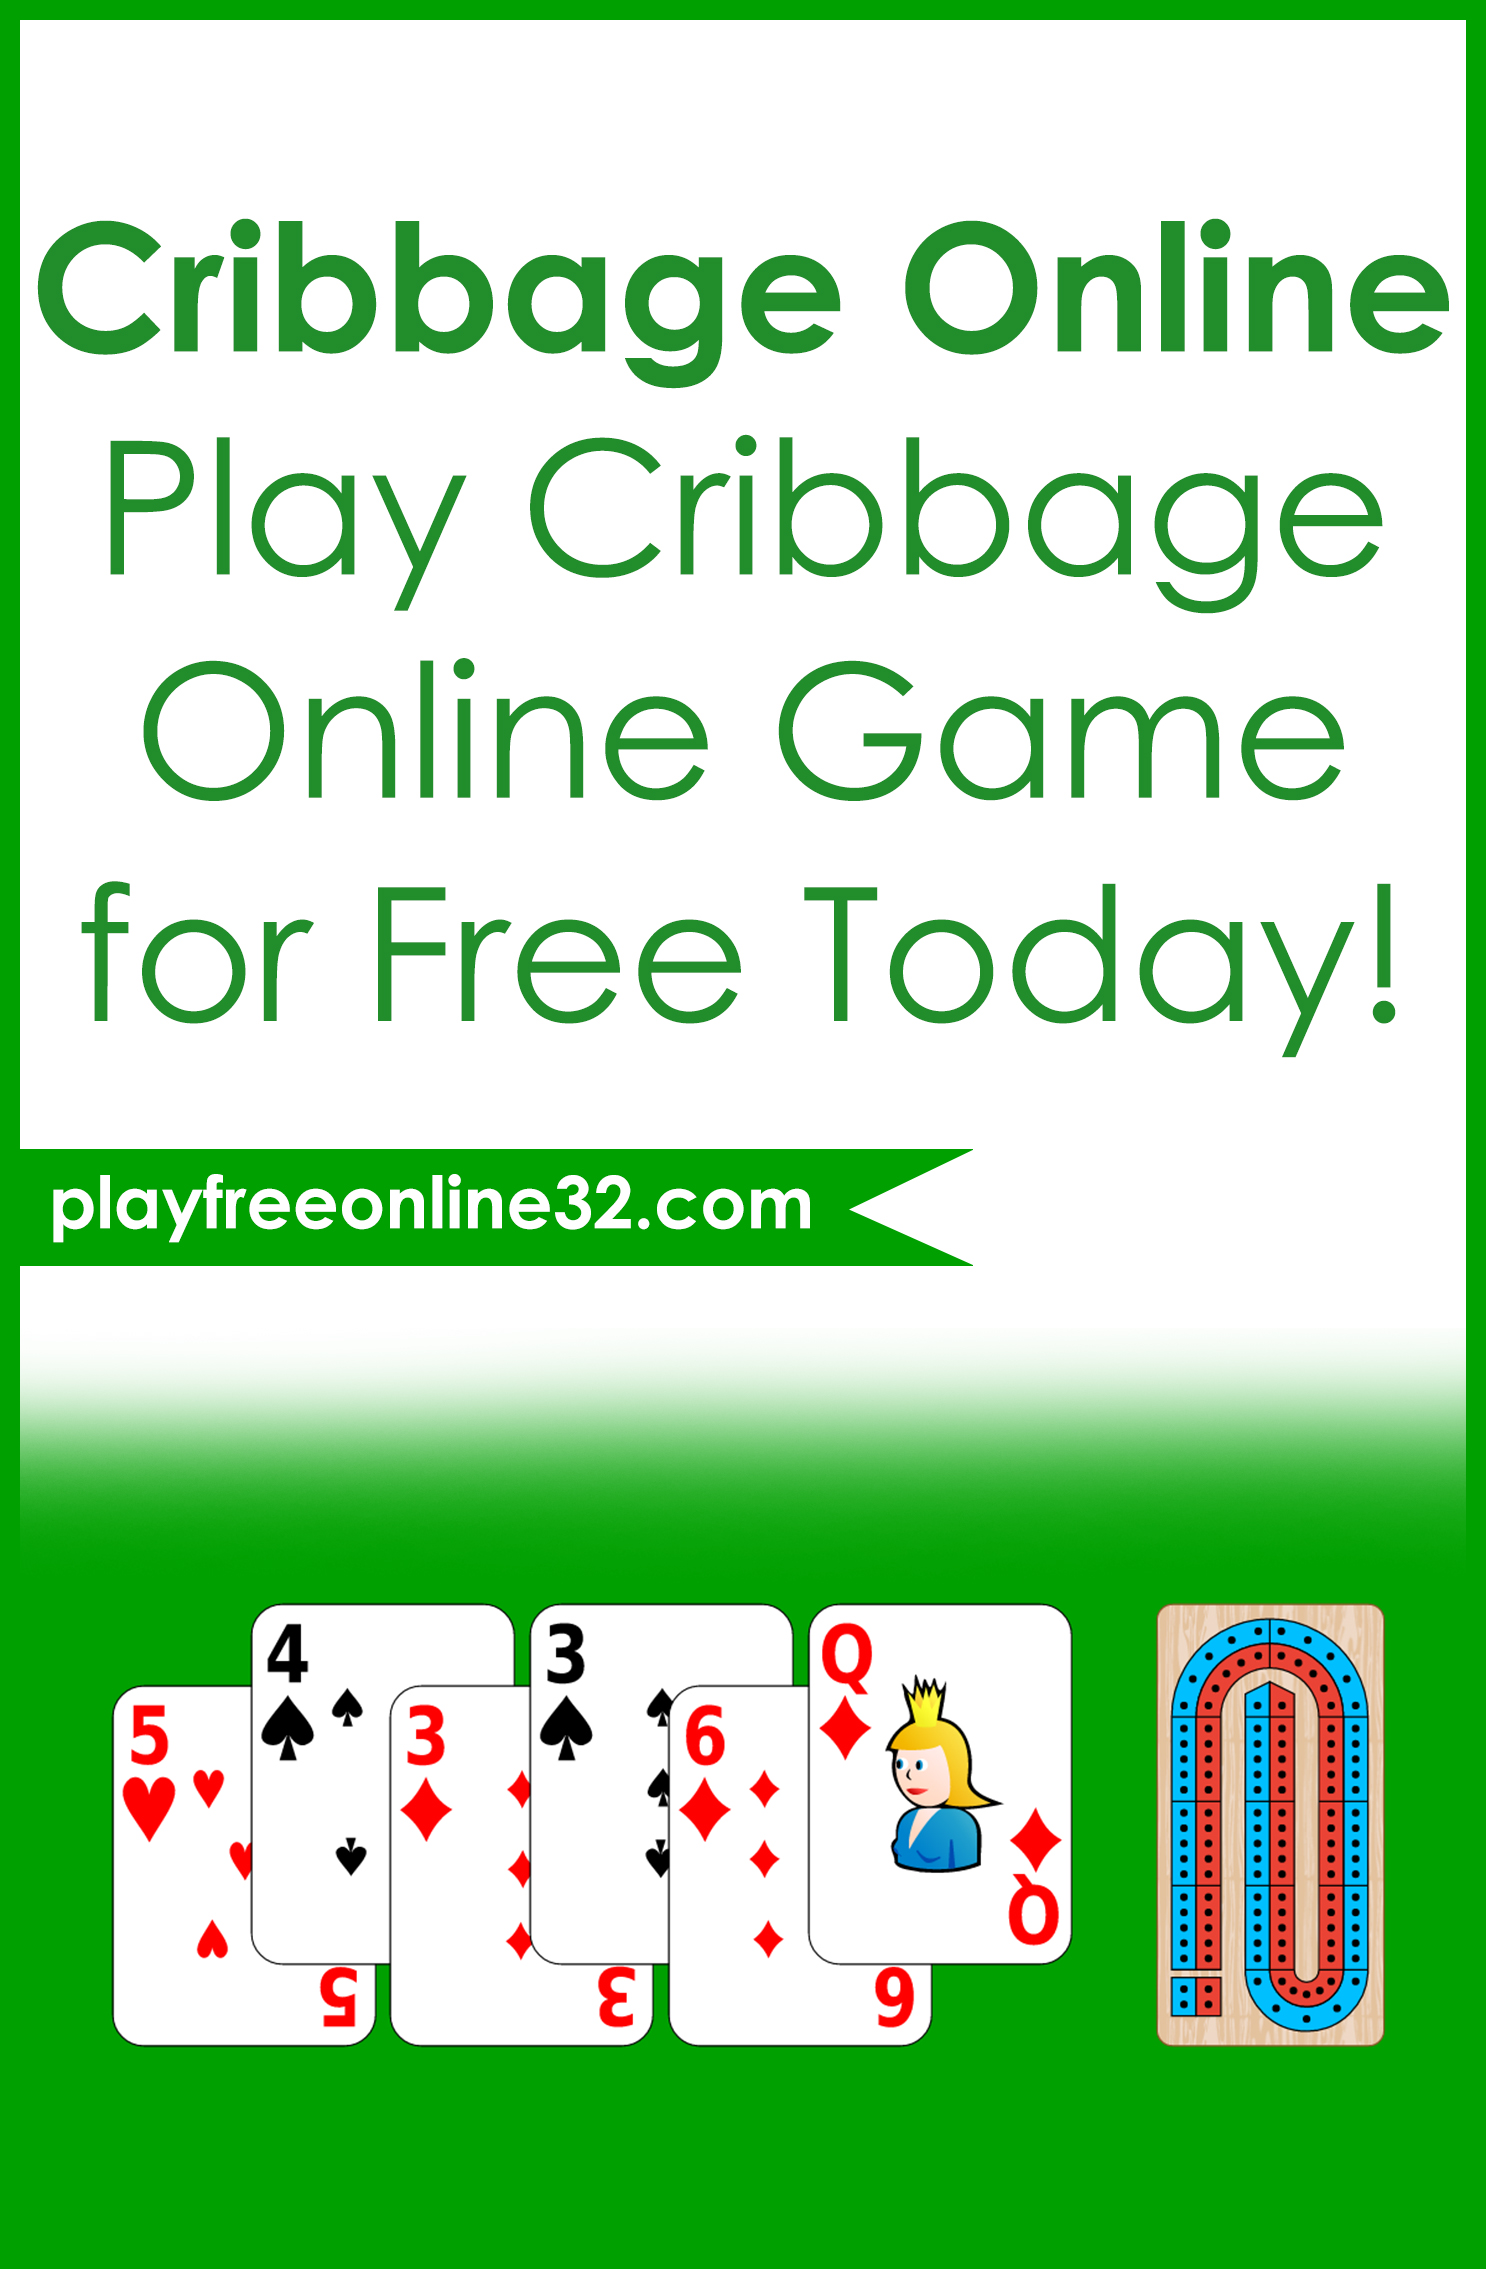 Cribbage Online • Play Cribbage Online Game for Free Today!